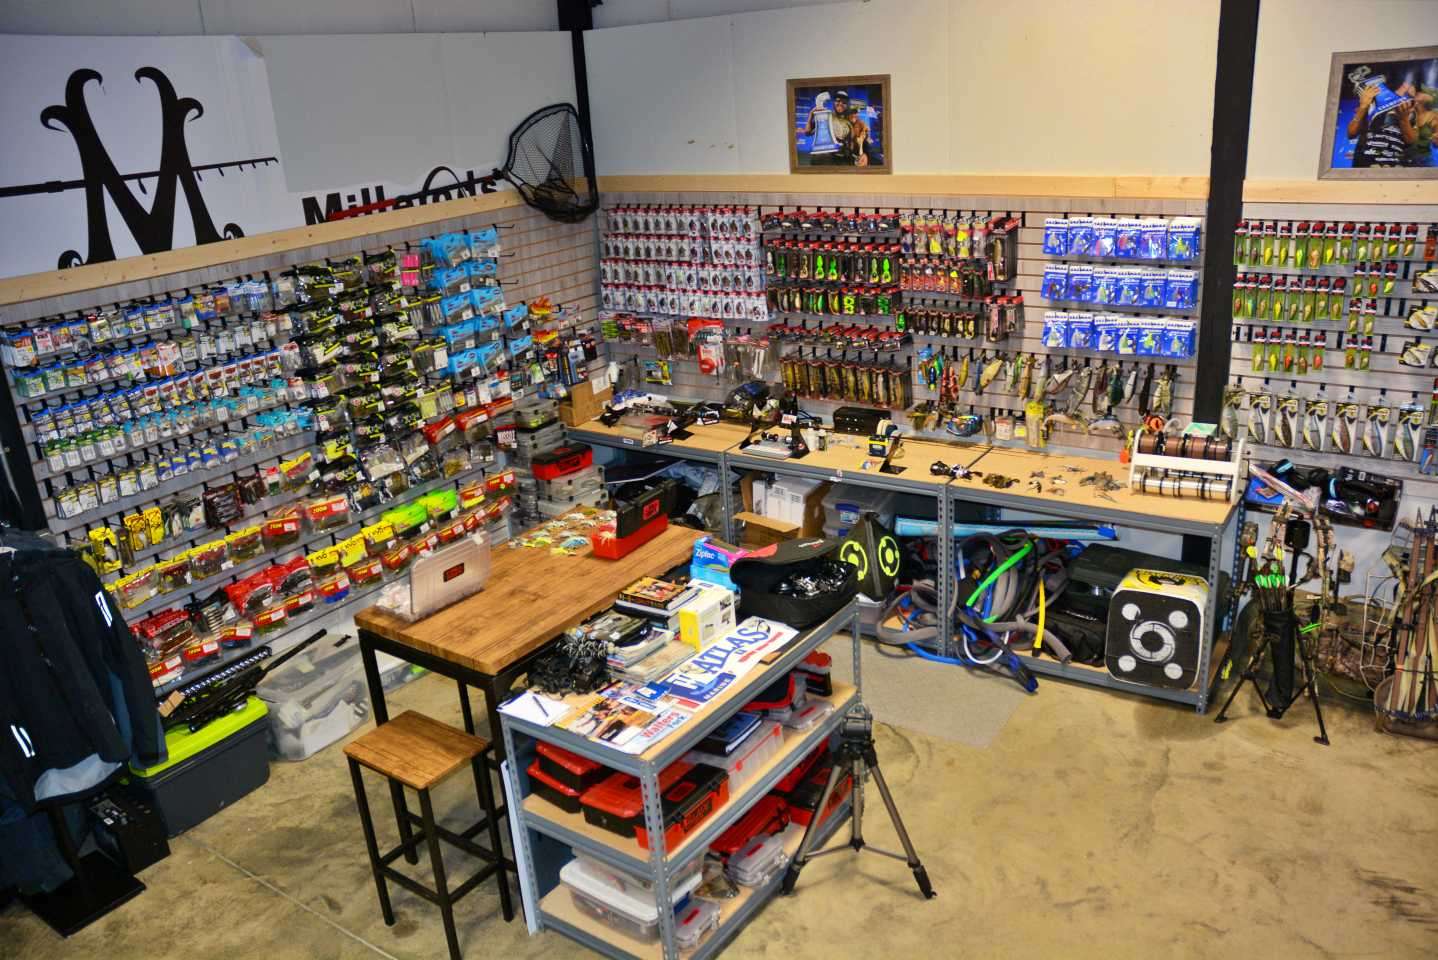 Before the boat arrived, Jocumsen spent time here customizing baits, organizing them and getting his tackle ready for tournaments from Florida to New York and Texas to Tennessee. 
